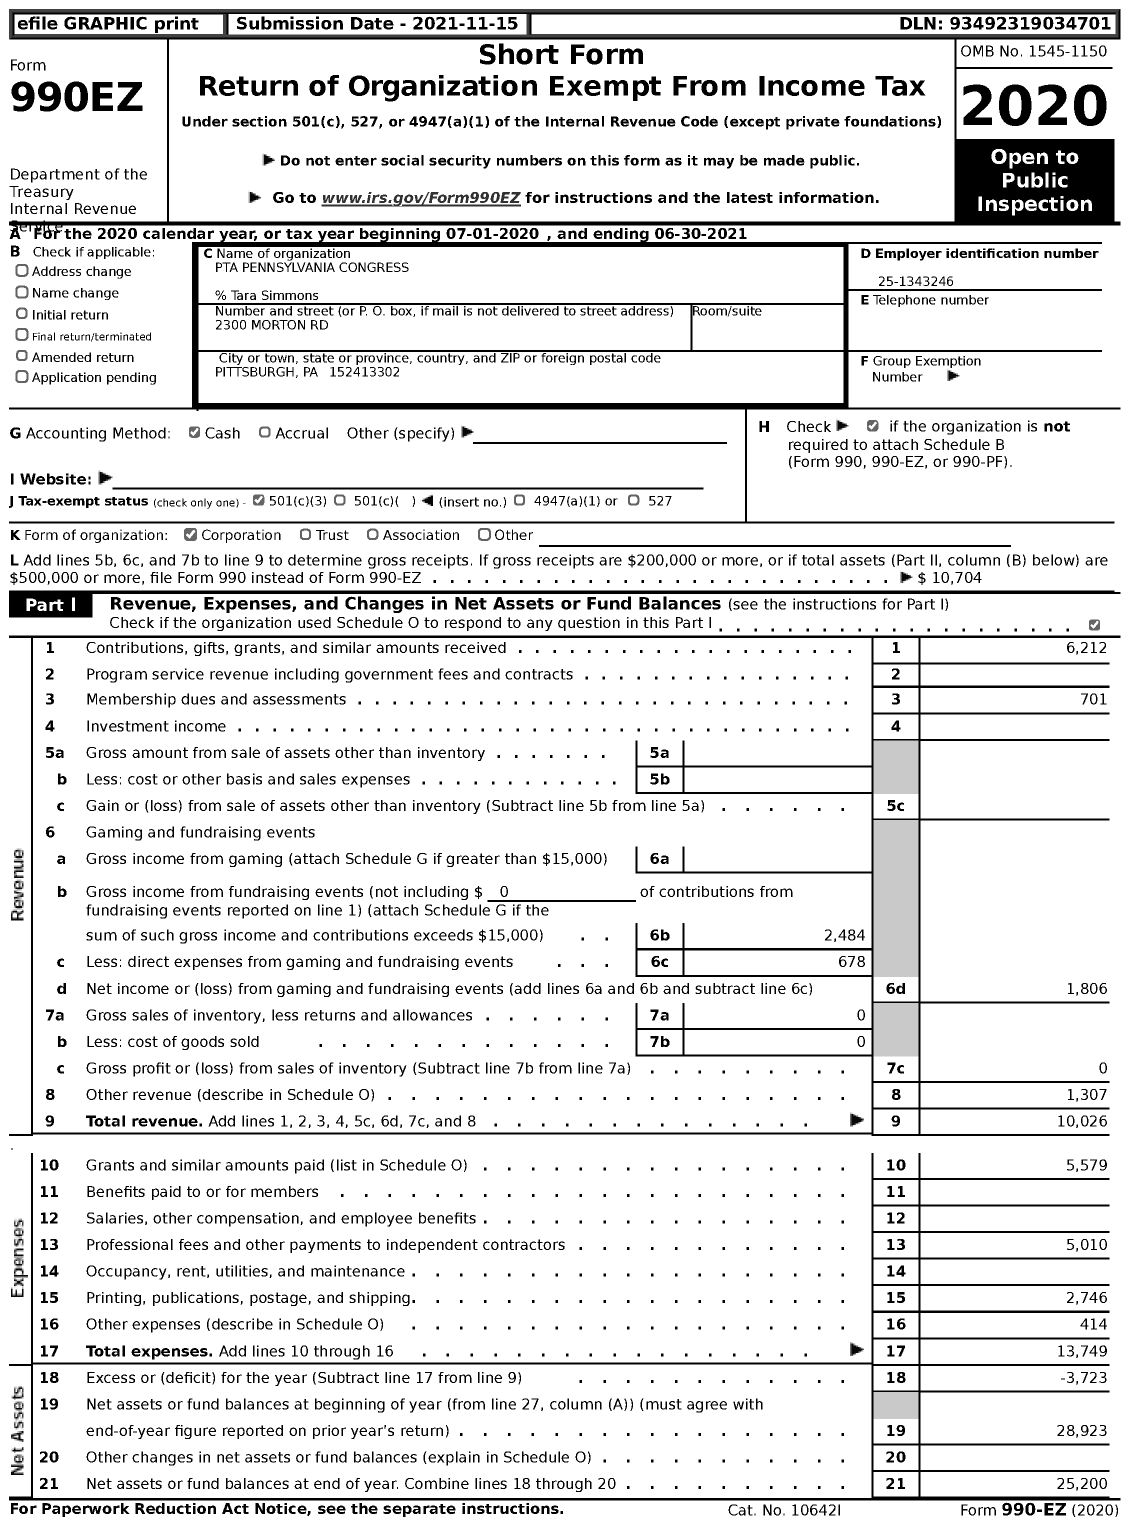 Image of first page of 2020 Form 990EZ for PTA Pennsylvania Congress / Albert F Baker PTA Inc